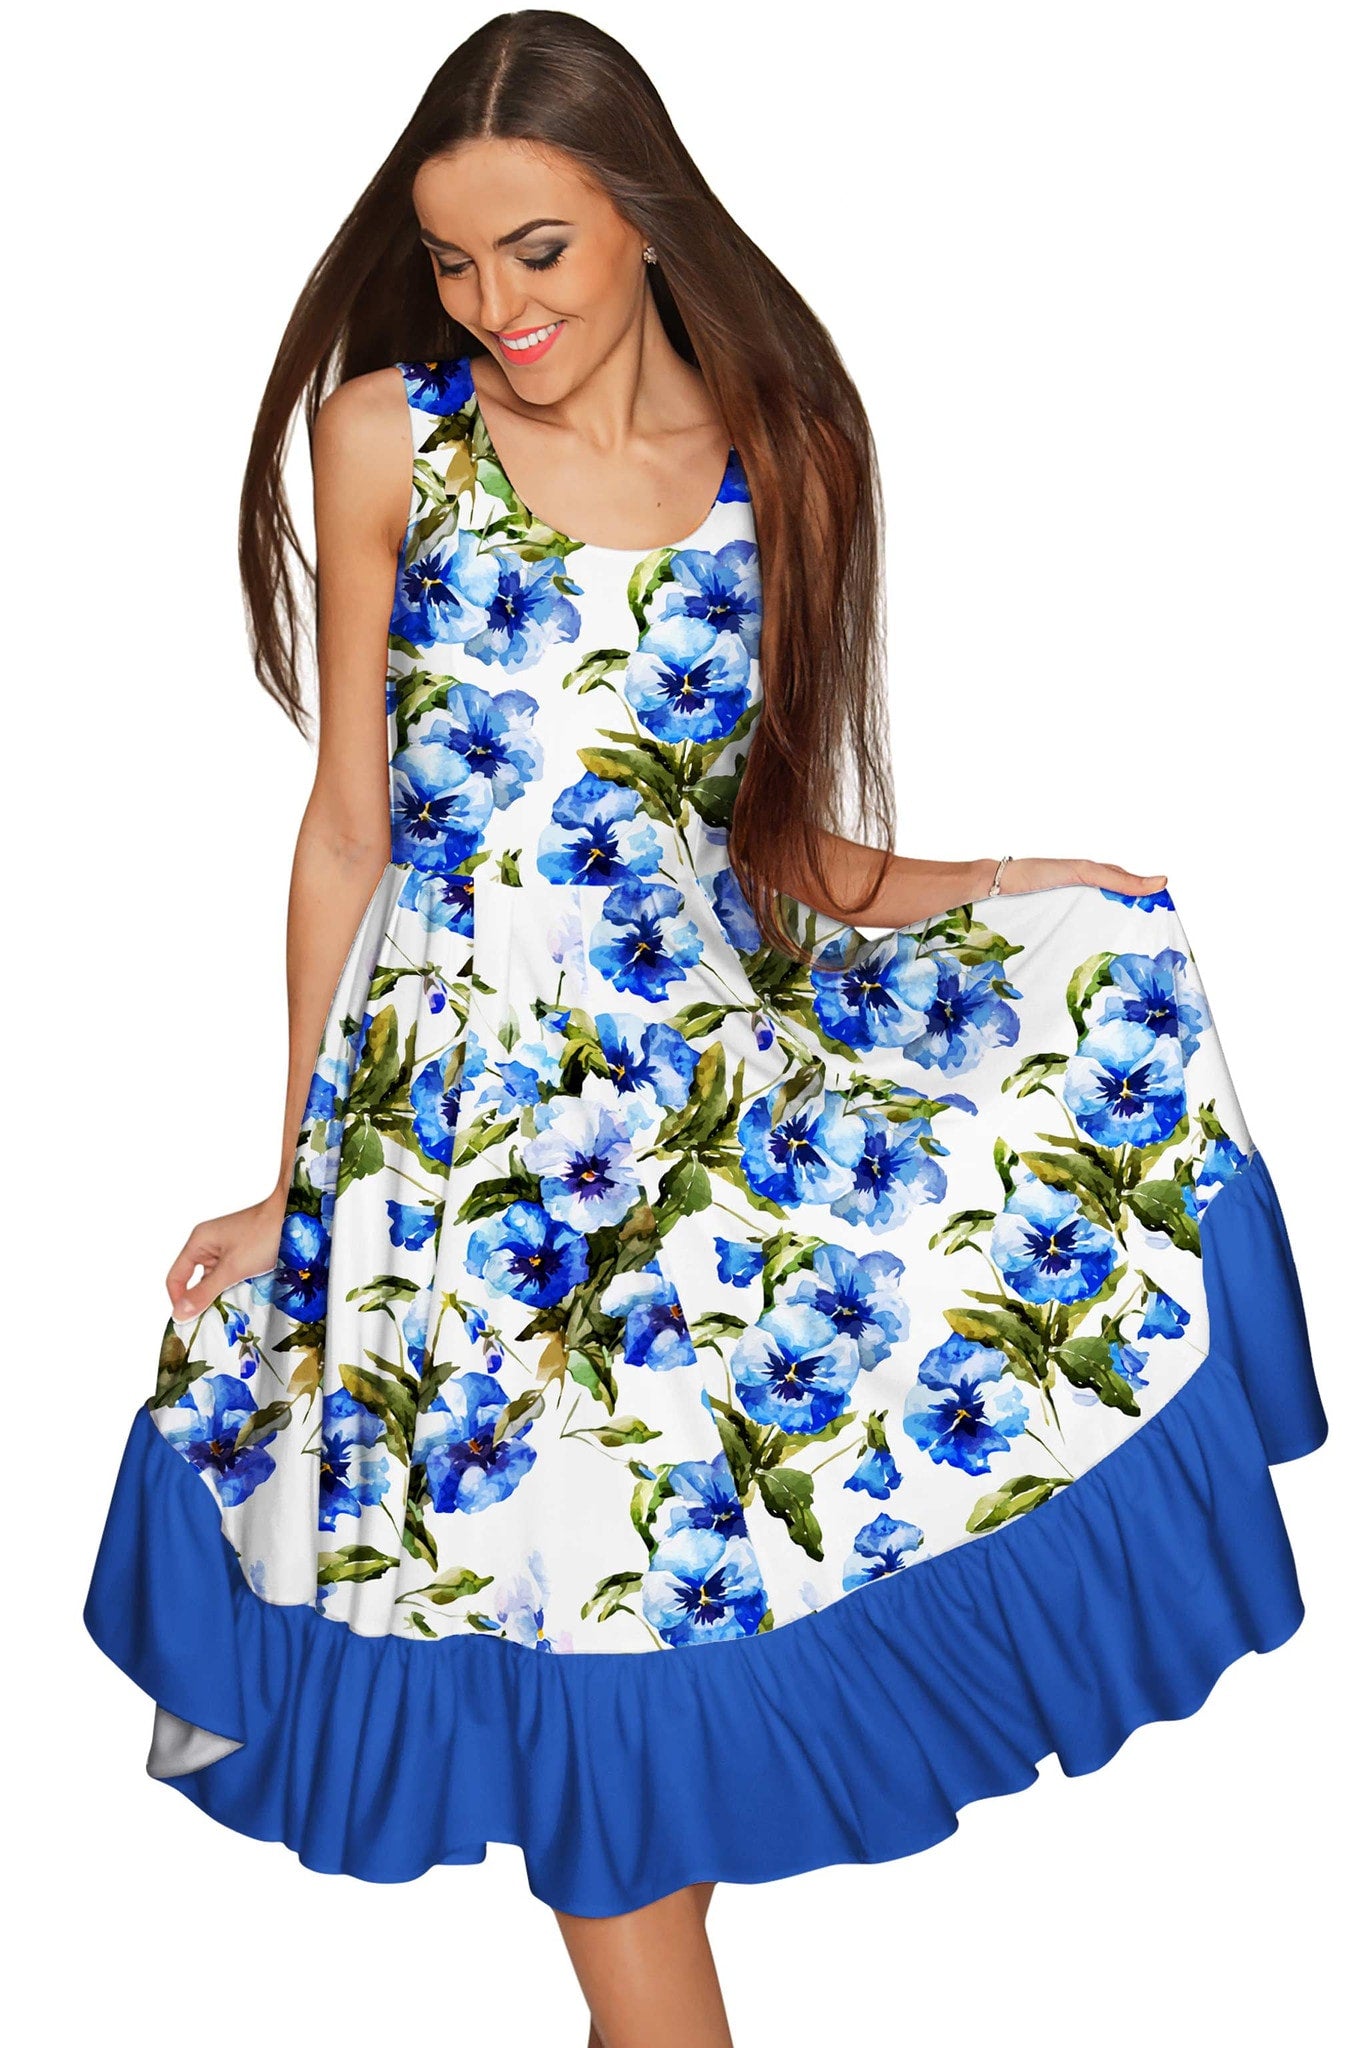 Catch Me Vizcaya Fit & Flare Cocktail Summer Dress - Women - Pineapple Clothing